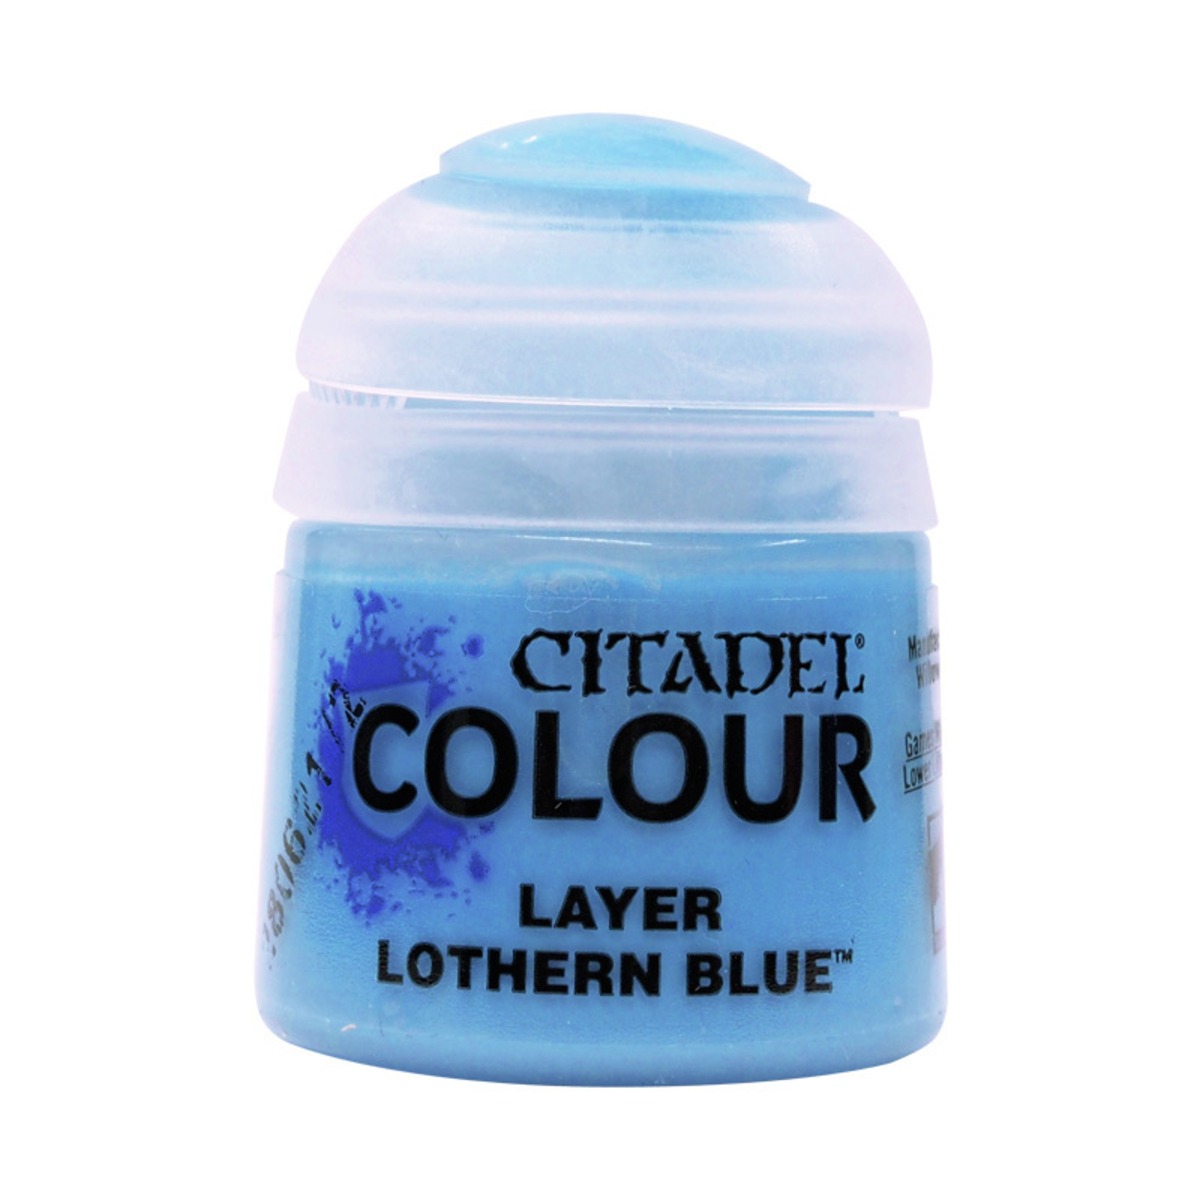 Citadel Colour – Layer – Lothern Blue